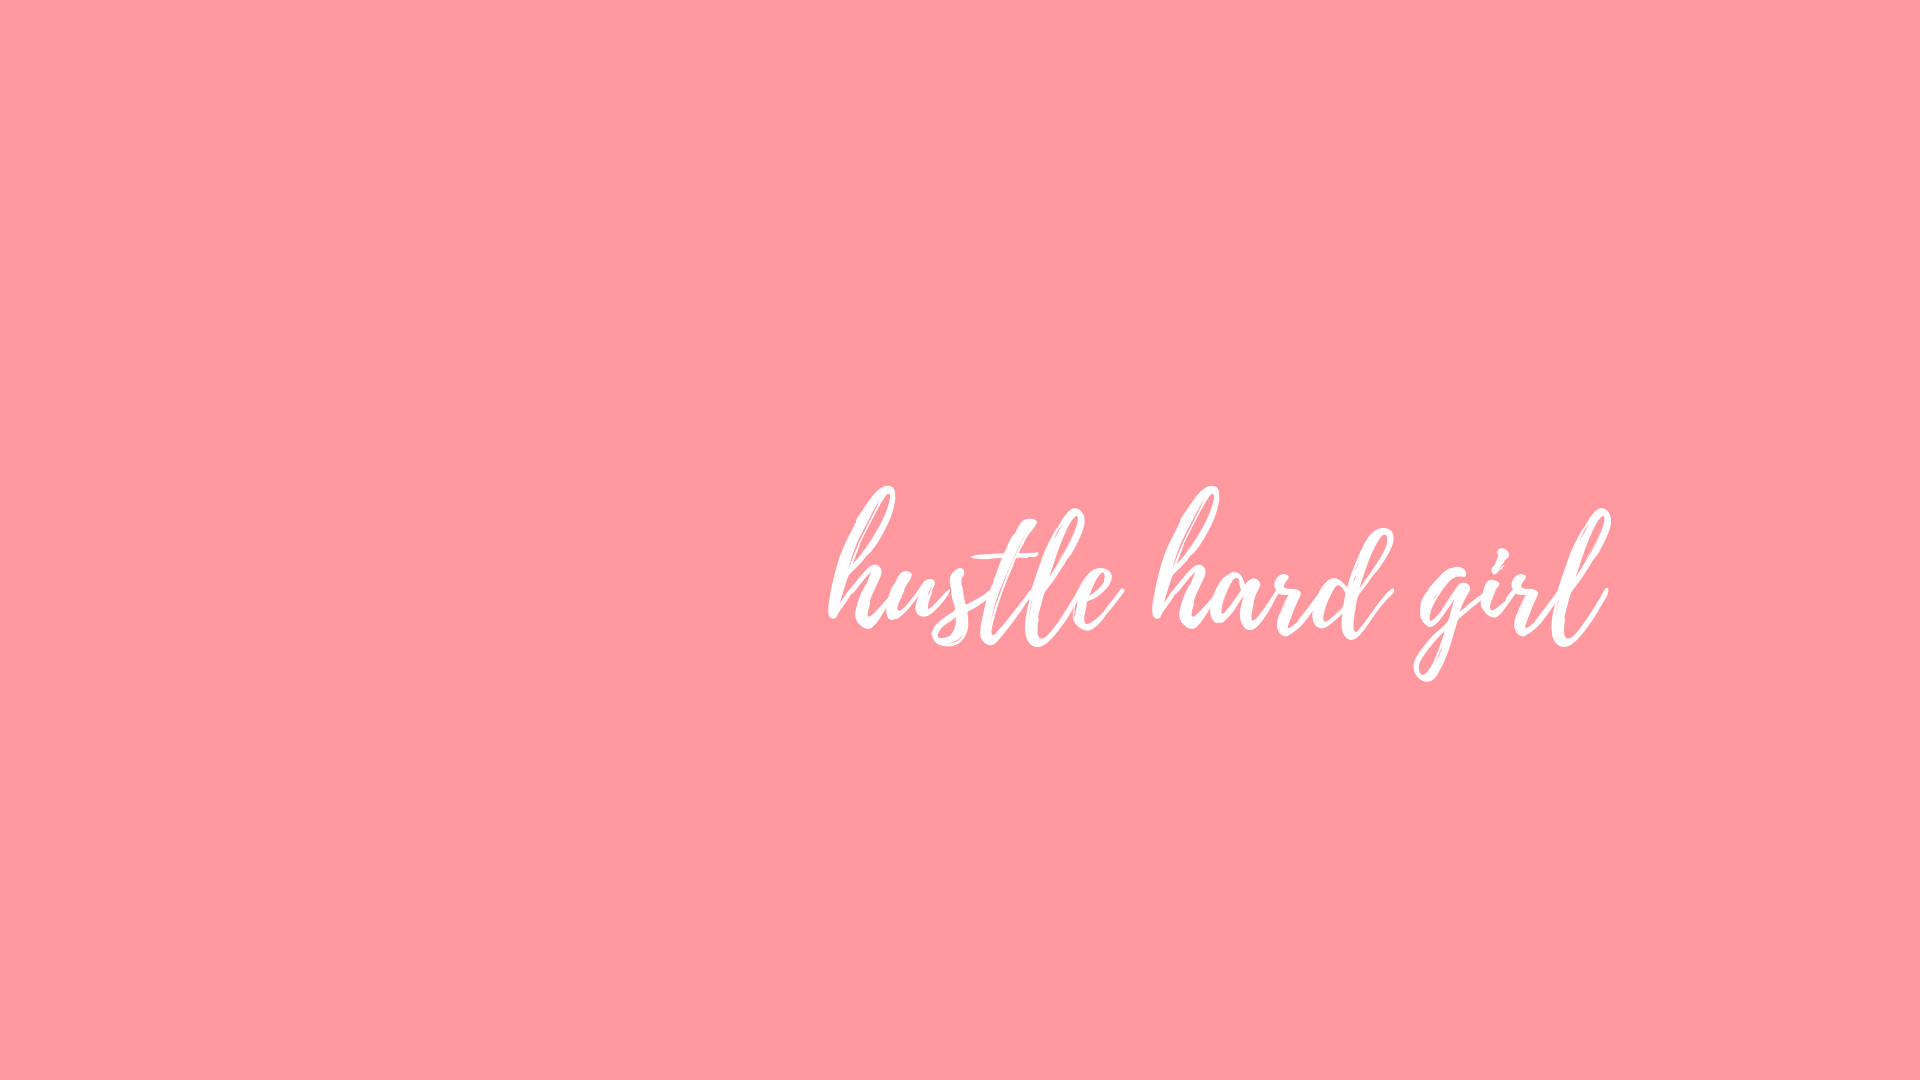 Hustle Hand Girl - A Pink Background With White Lettering Wallpaper